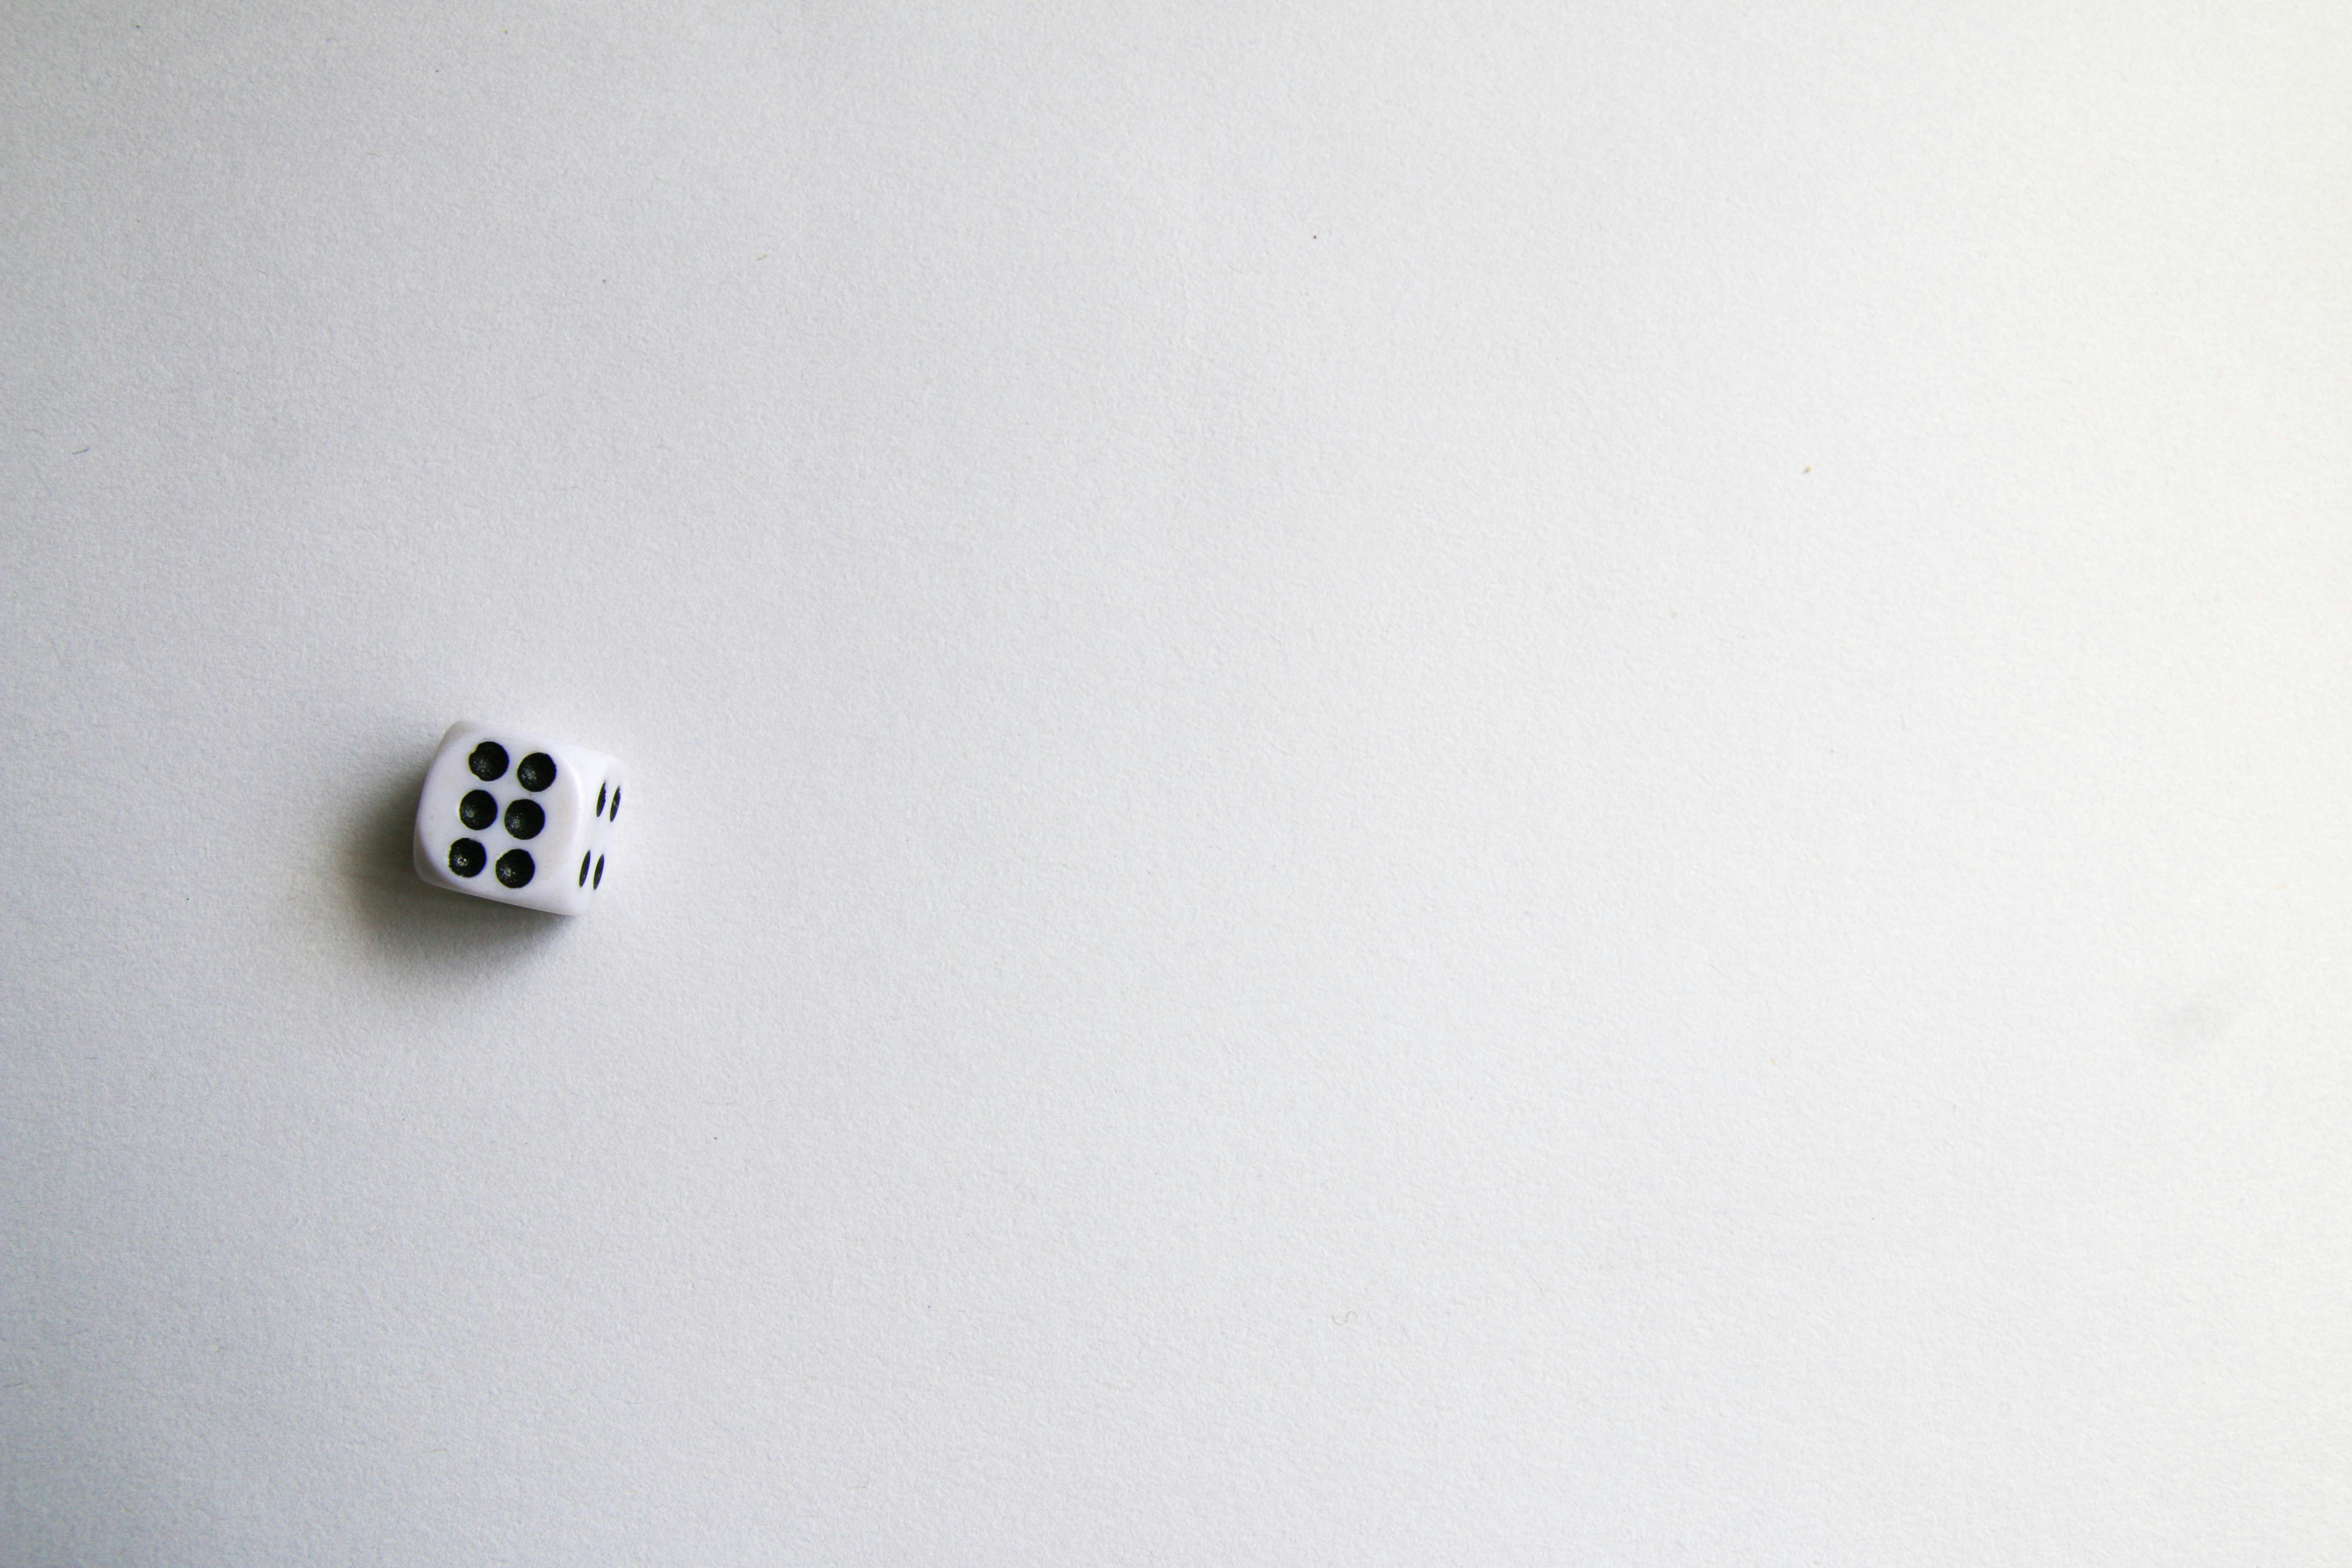 white and black dice on white surface